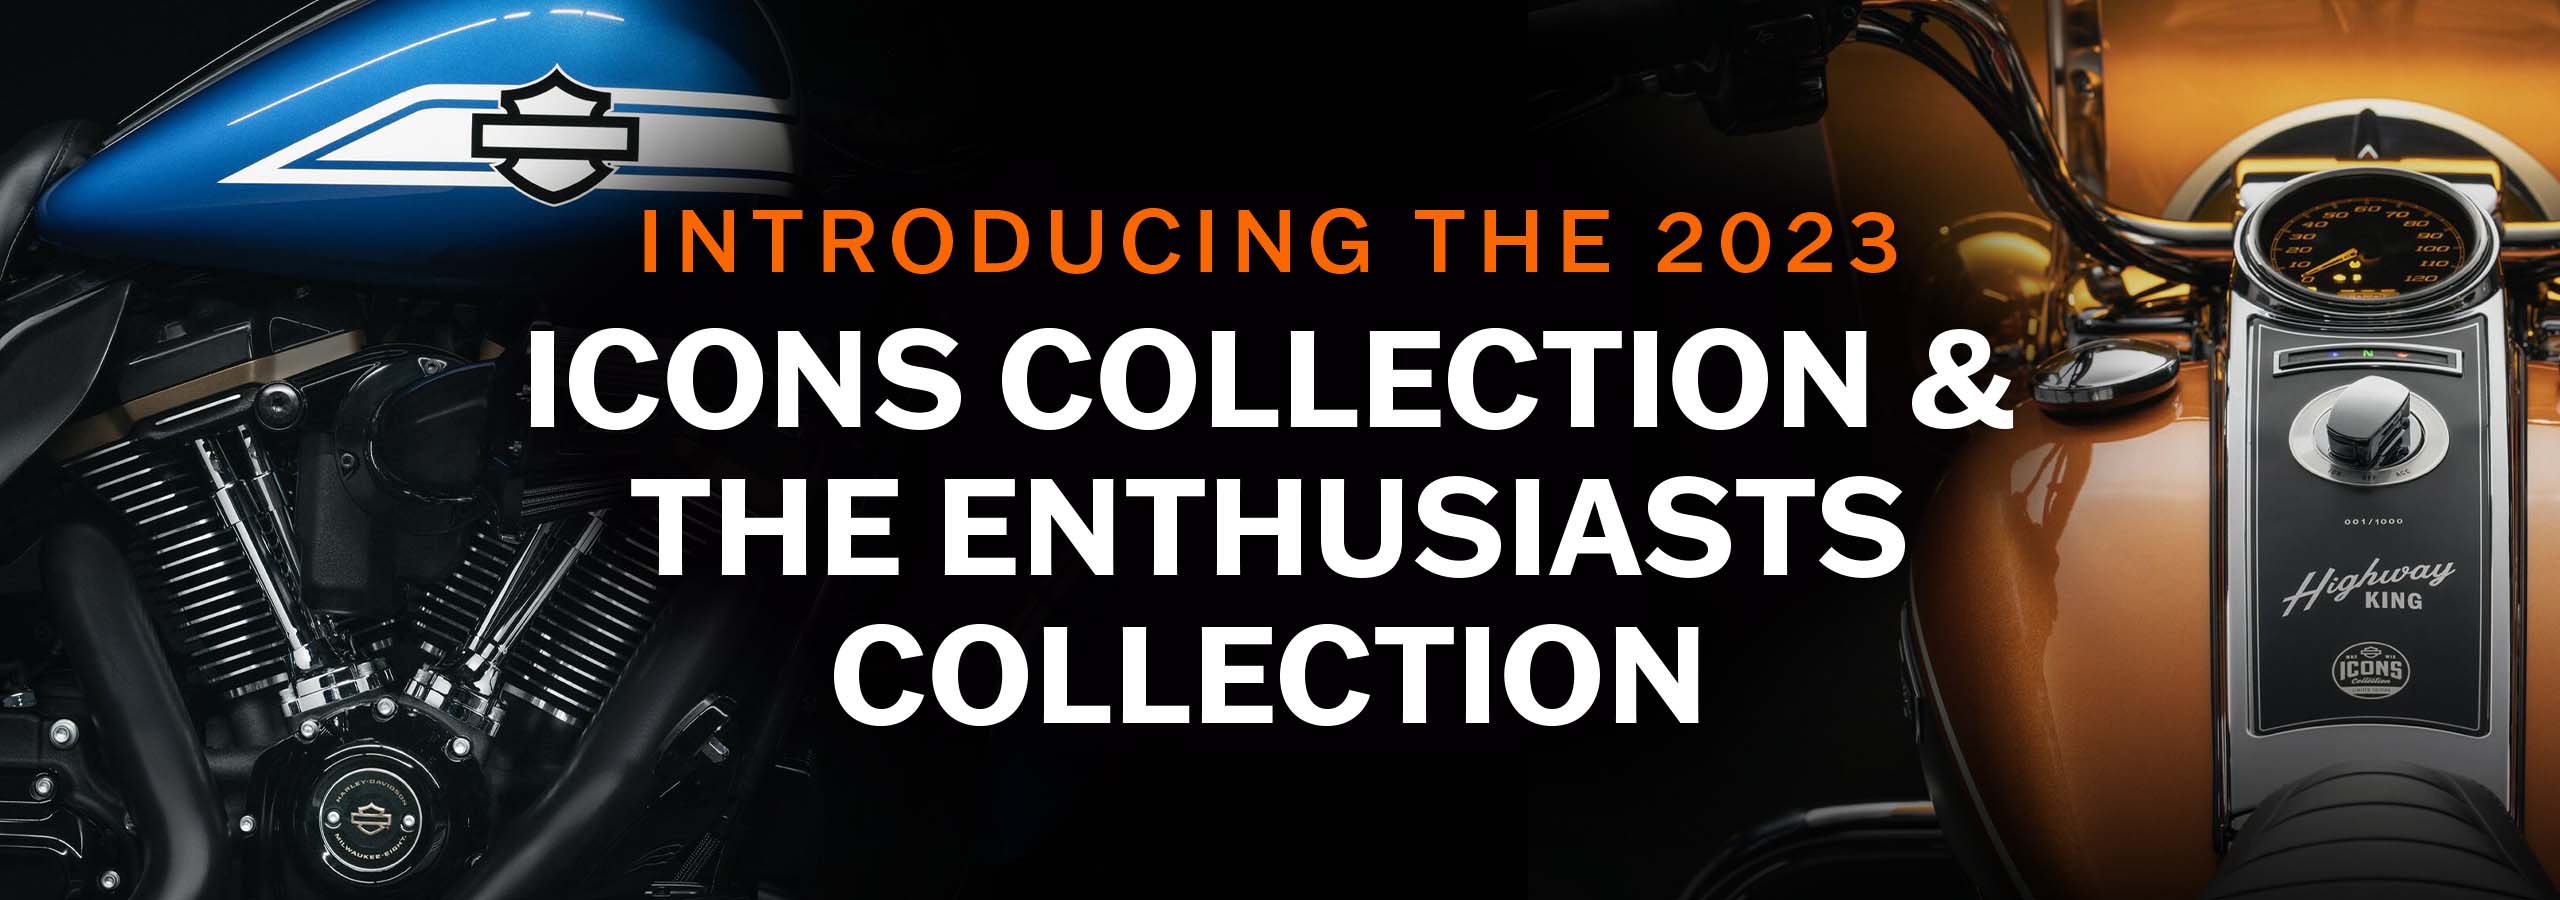 Introducing the 2023 Icons and Enthusiasts Collection